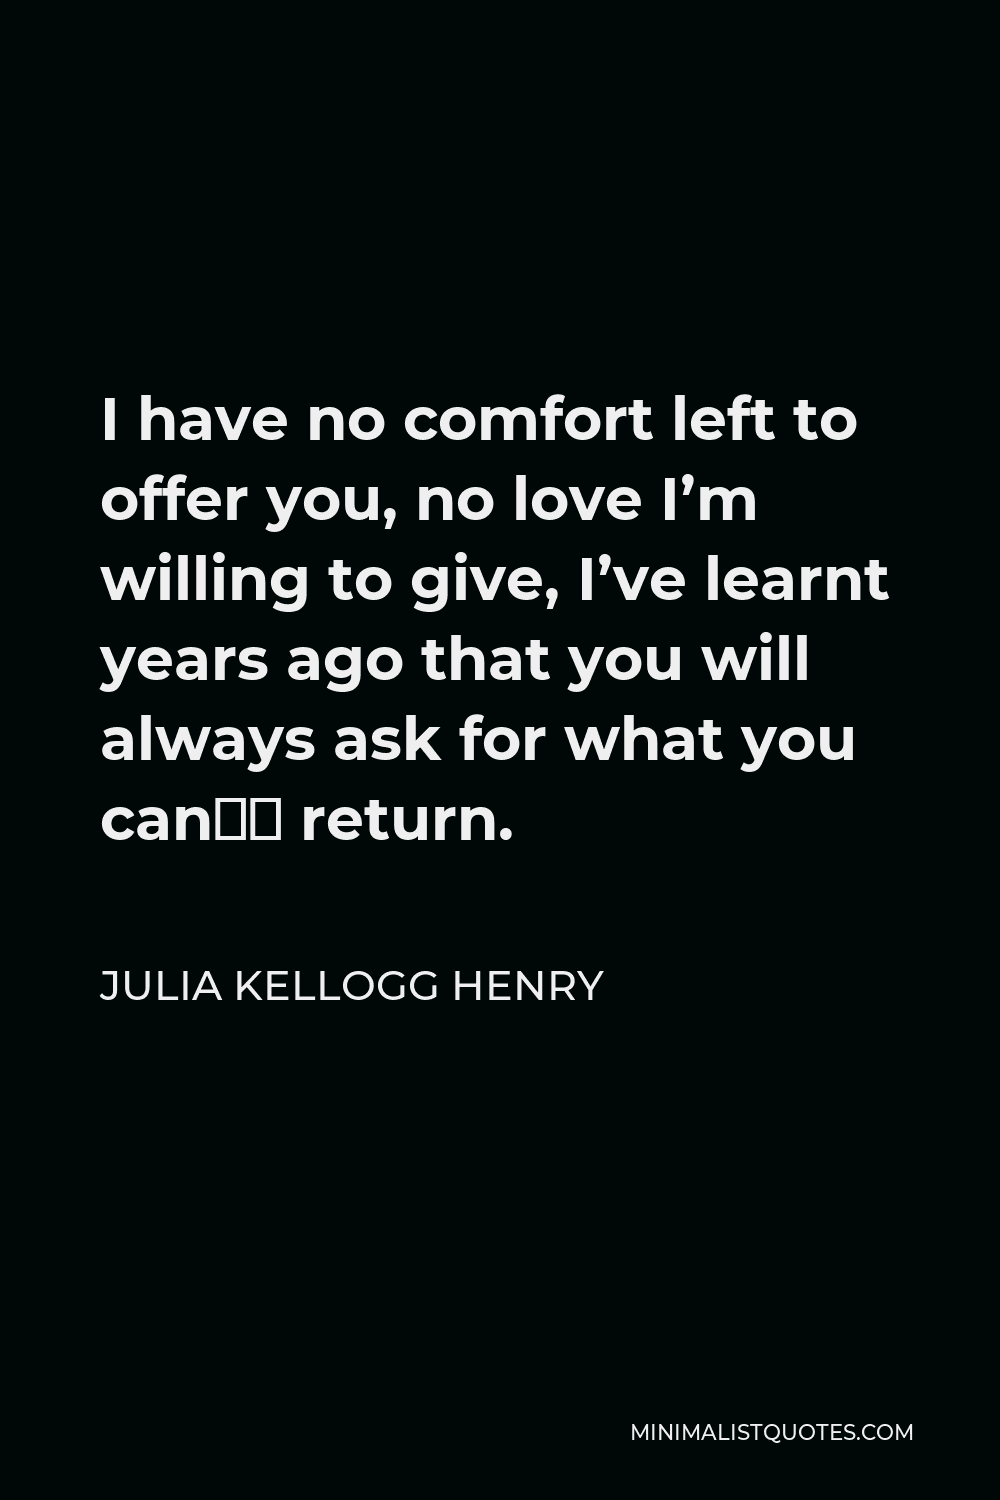 Julia Kellogg Henry Quote - I have no comfort left to offer you, no love I’m willing to give, I’ve learnt years ago that you will always ask for what you can’t return.